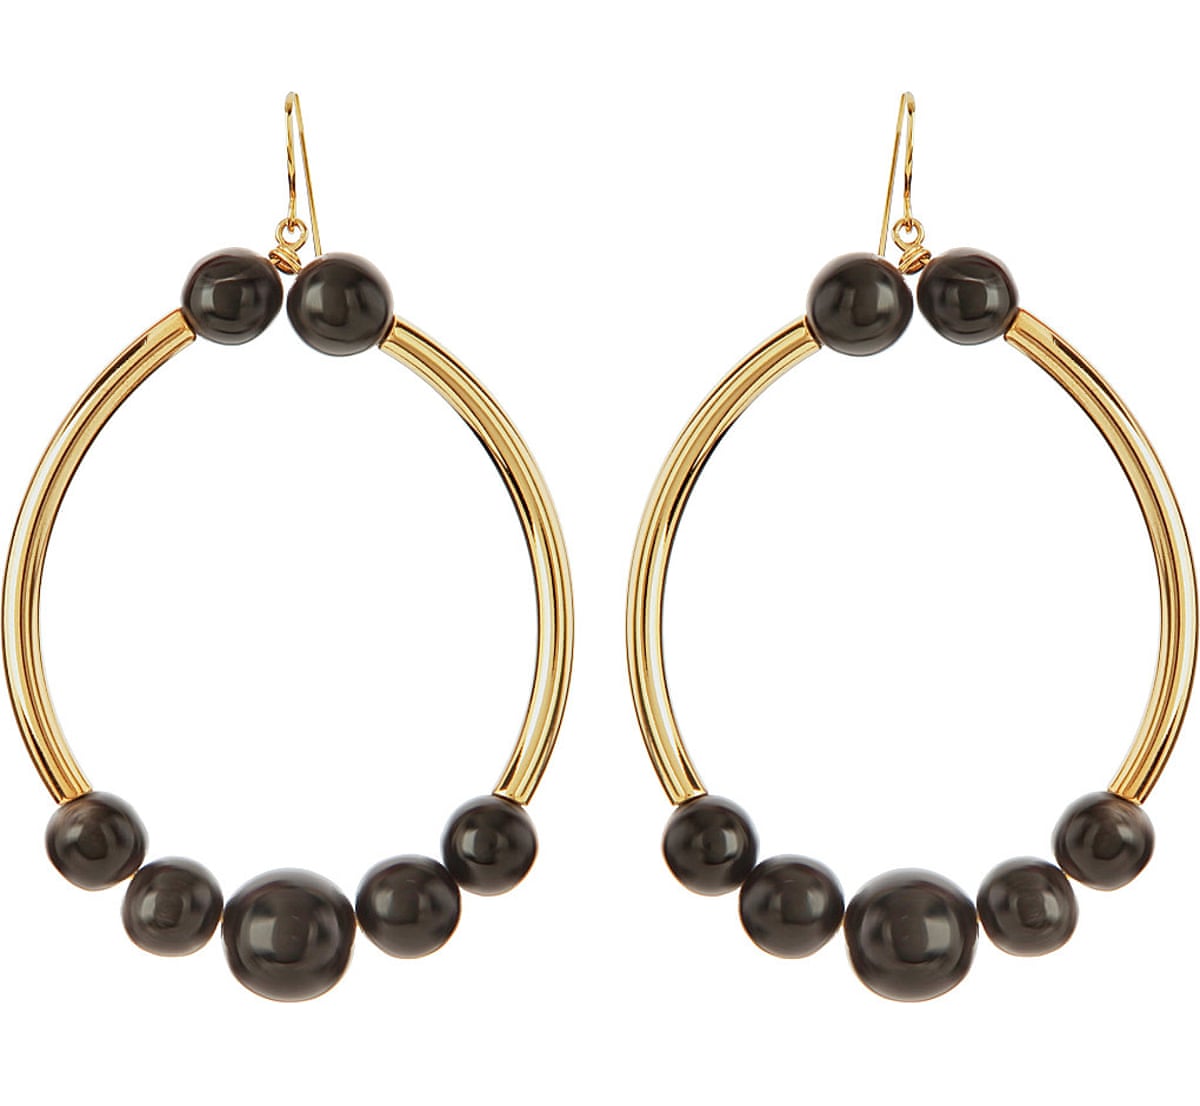 Hoop dreams: 10 of the best gold hooped earrings | Fashion | The Guardian